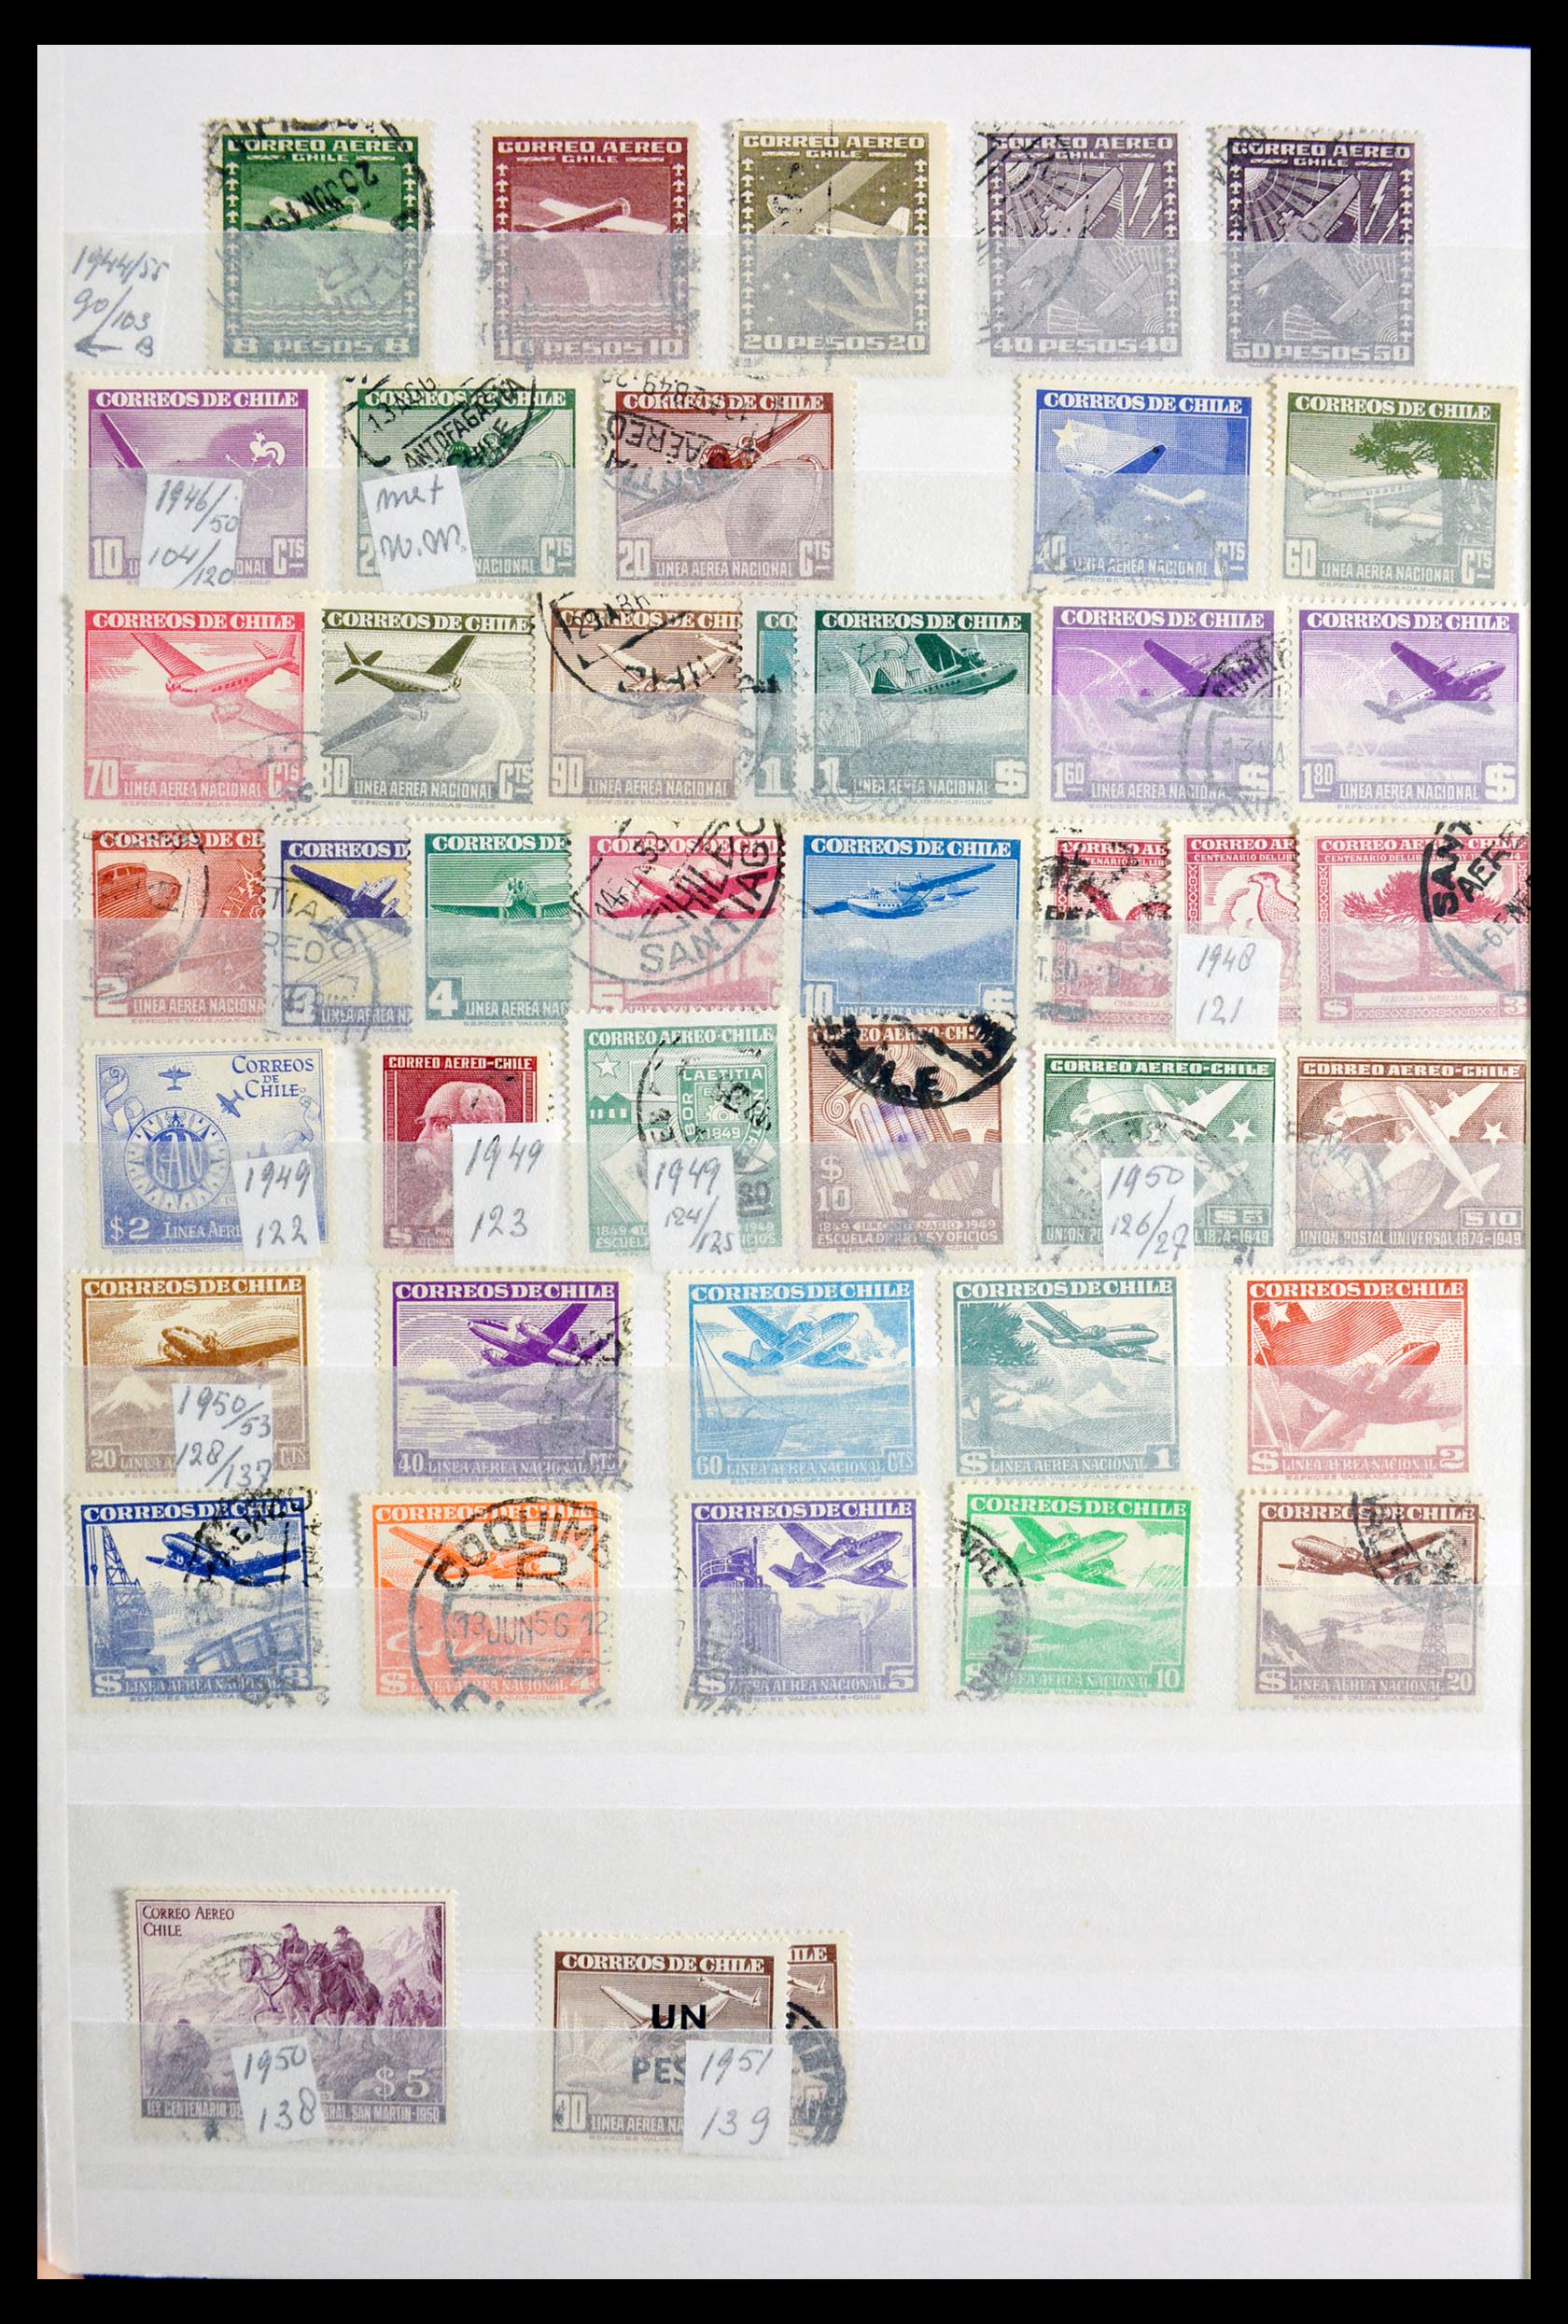 29917 036 - 29917 Latin America airmail stamps.